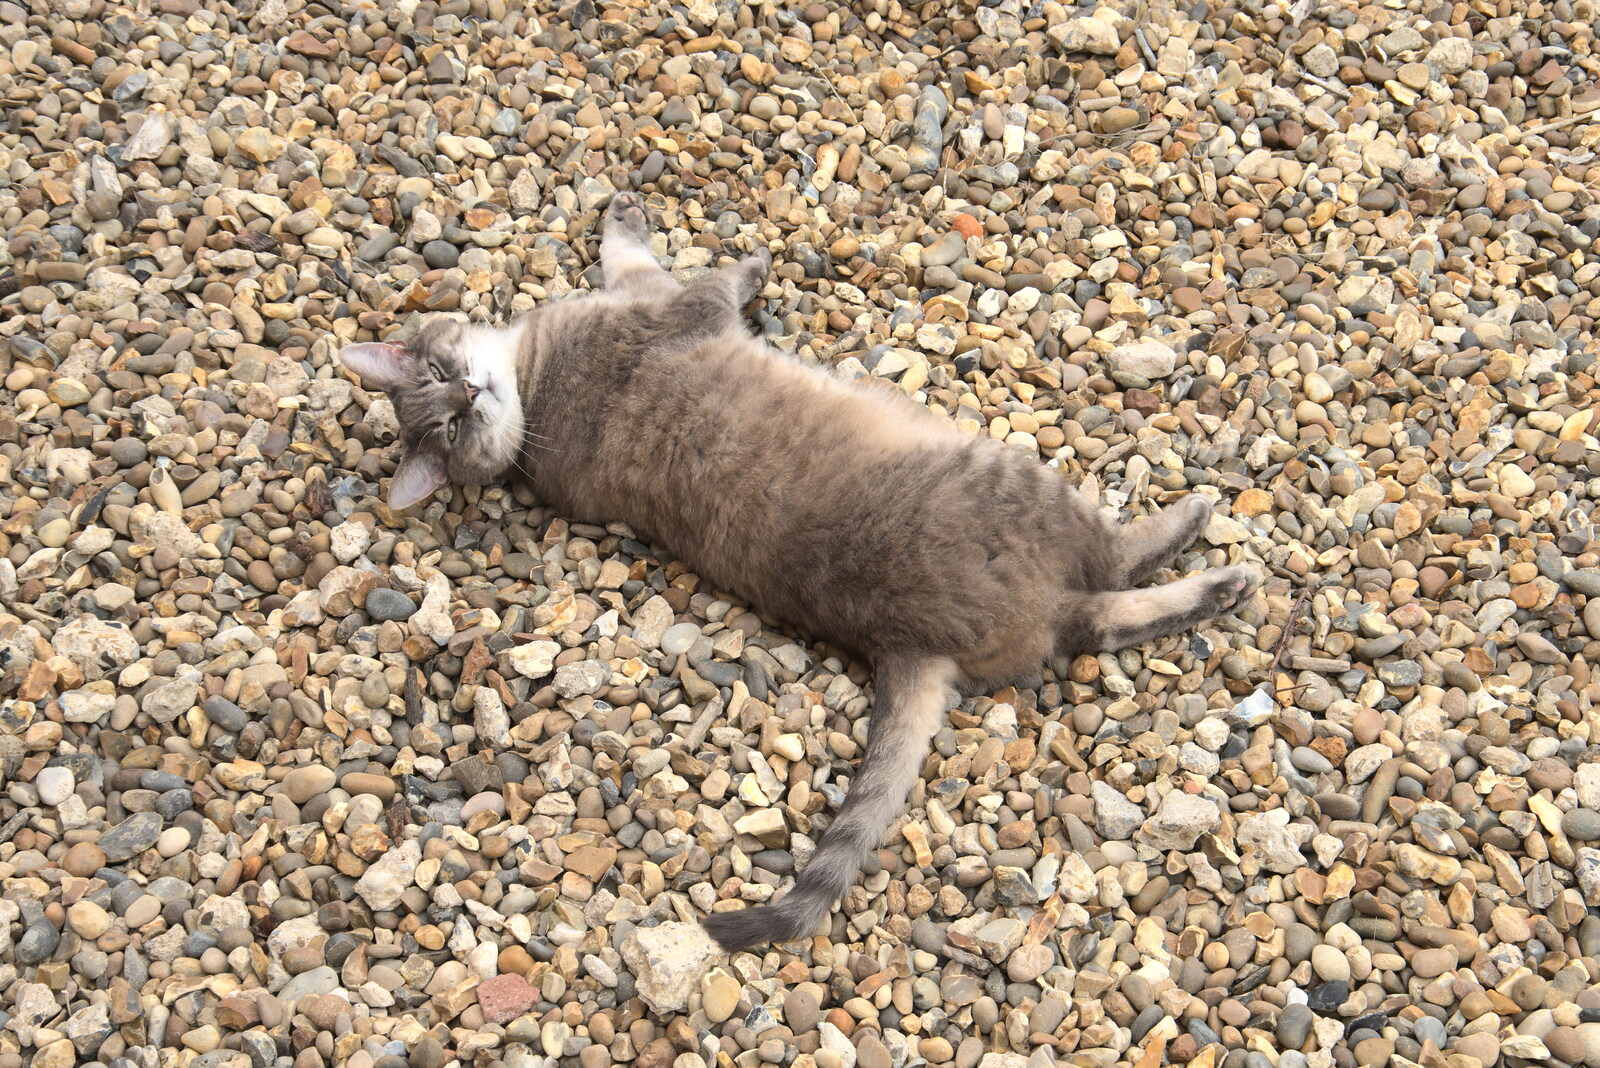 Boris - Stripey Cat - rolls around in the gravel from Planting a Tree, Town Moors, Eye, Suffolk - 10th July 2021